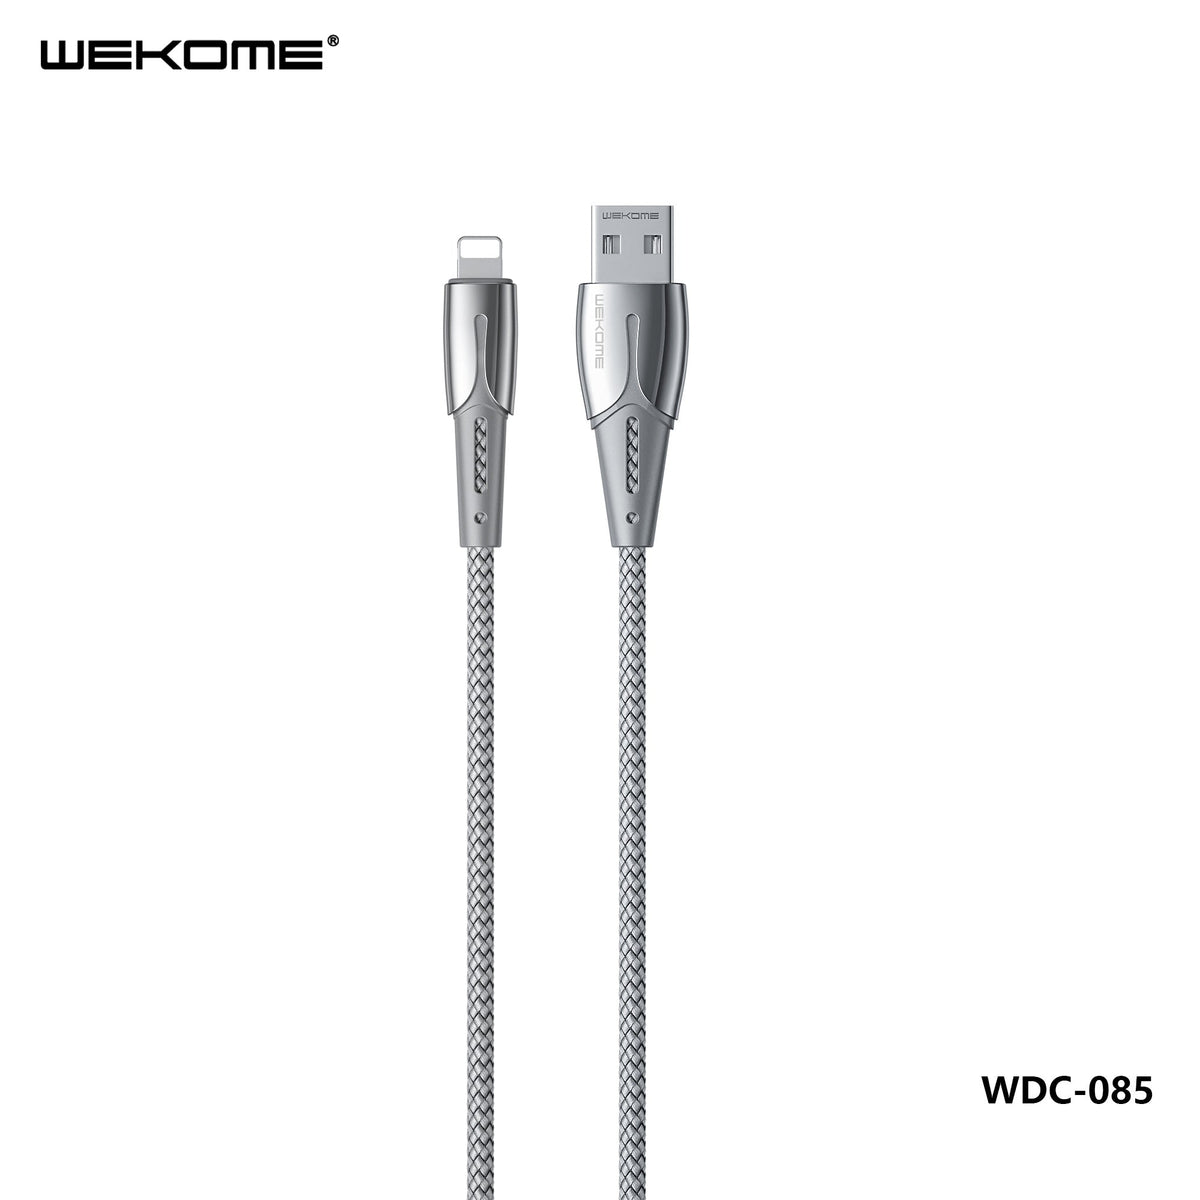 WEKOME (WDC-085I) GOLDSIM TOP ZINC ALLOY DATA CABLE FOR IPH (1.2M) - Silver